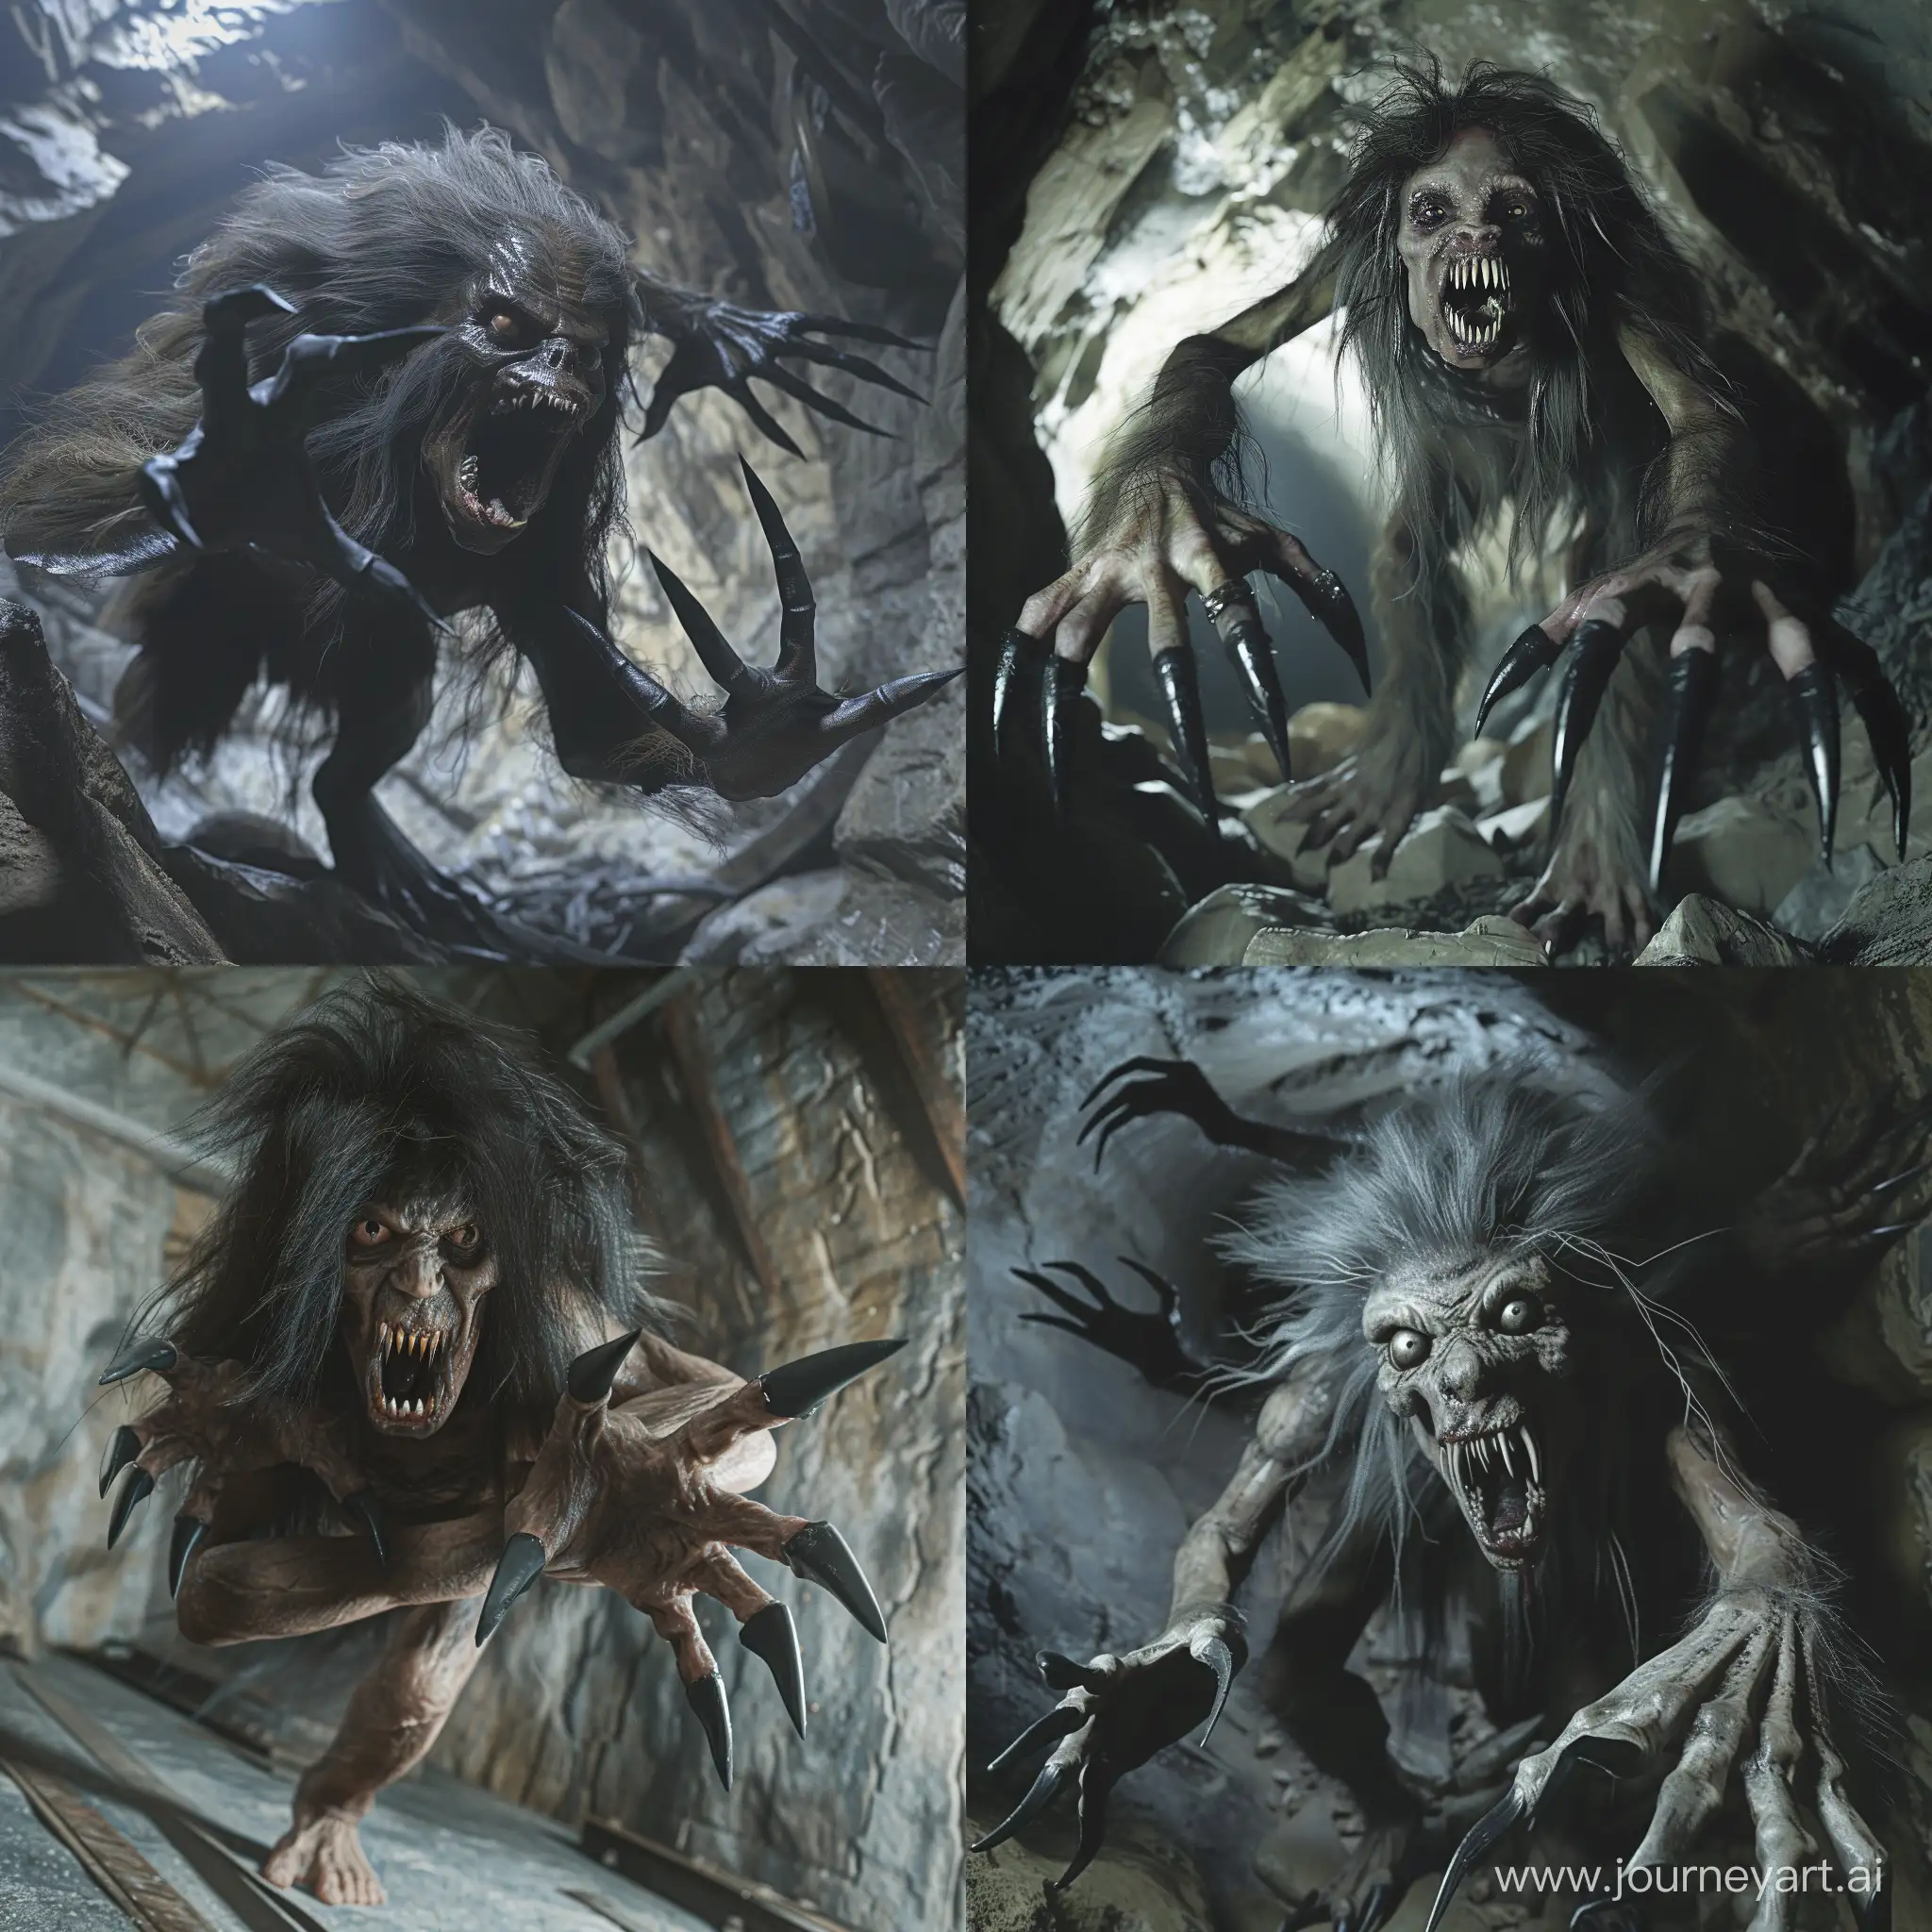 Undead horrible shaggy ghoul woman attacks using the her pointed black claws On their own five-fingered hands, its mouth menacingly open, revealing pointed teeth resembling fangs. The scene takes place in a dark abandoned mine. High detail, photorealism, hyper-realism.